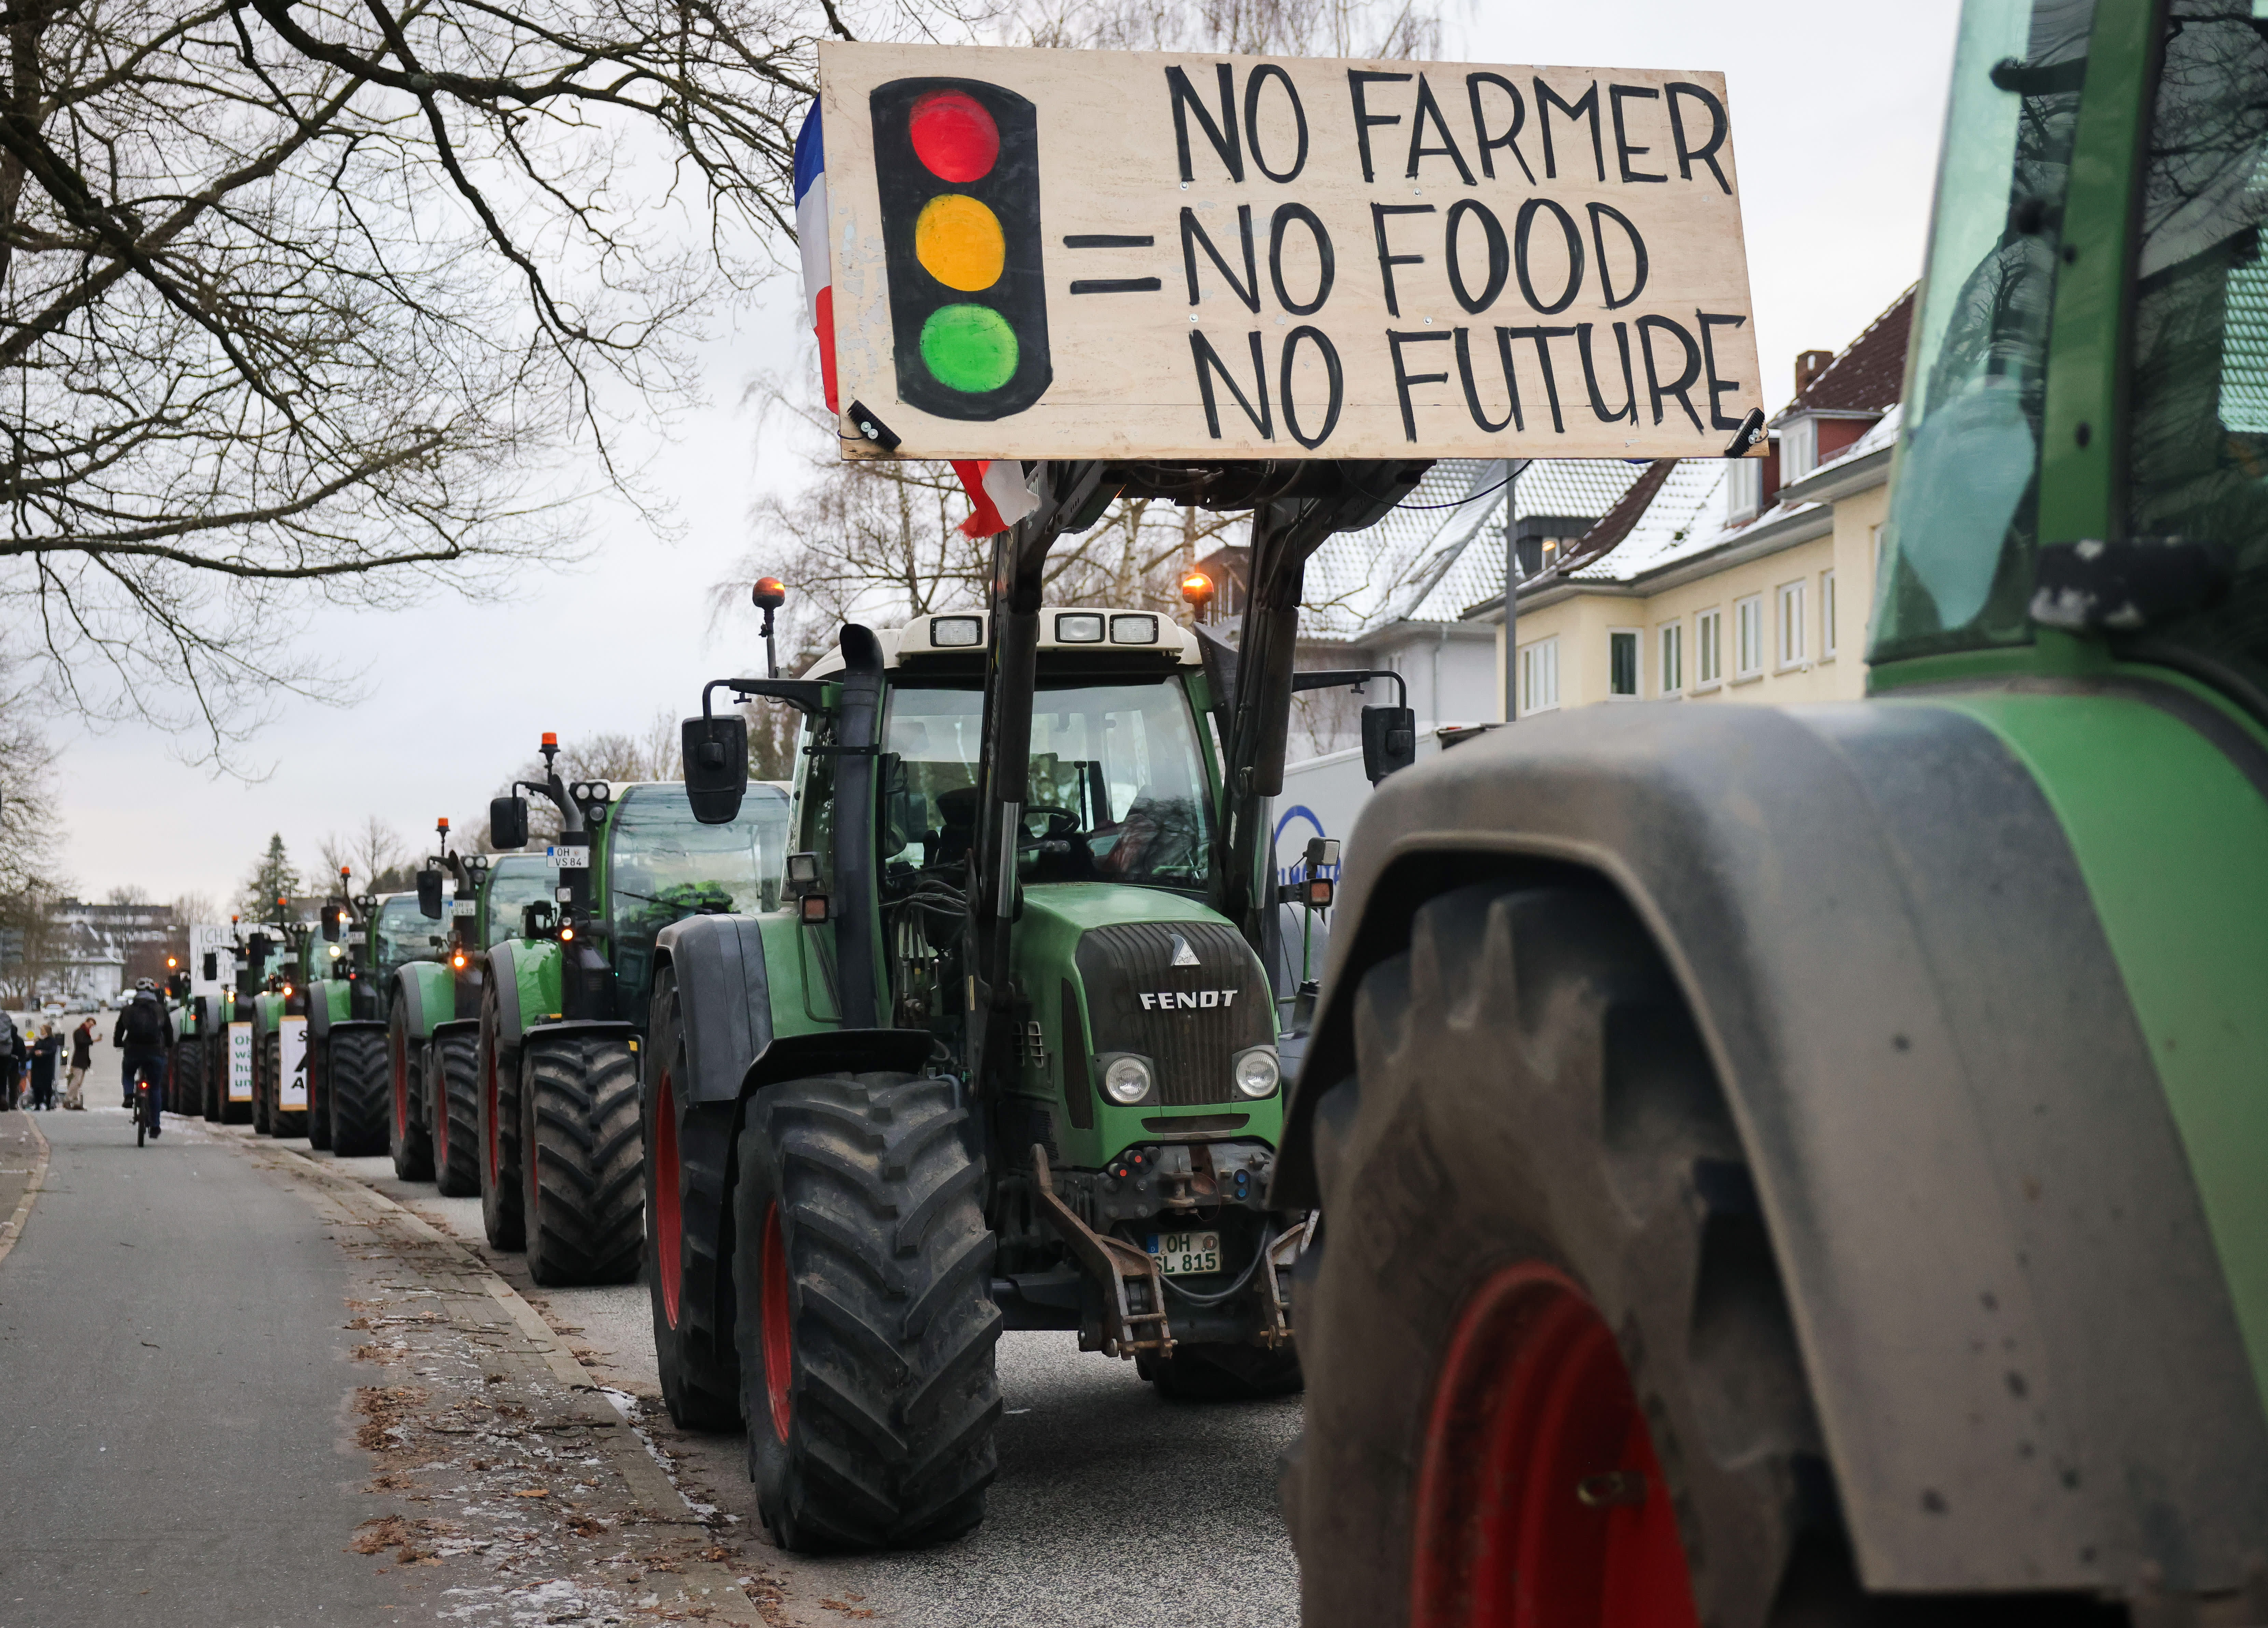 Petition · Repeal the new Farm Laws | No Farmers, No Food, No Future! ·  Change.org